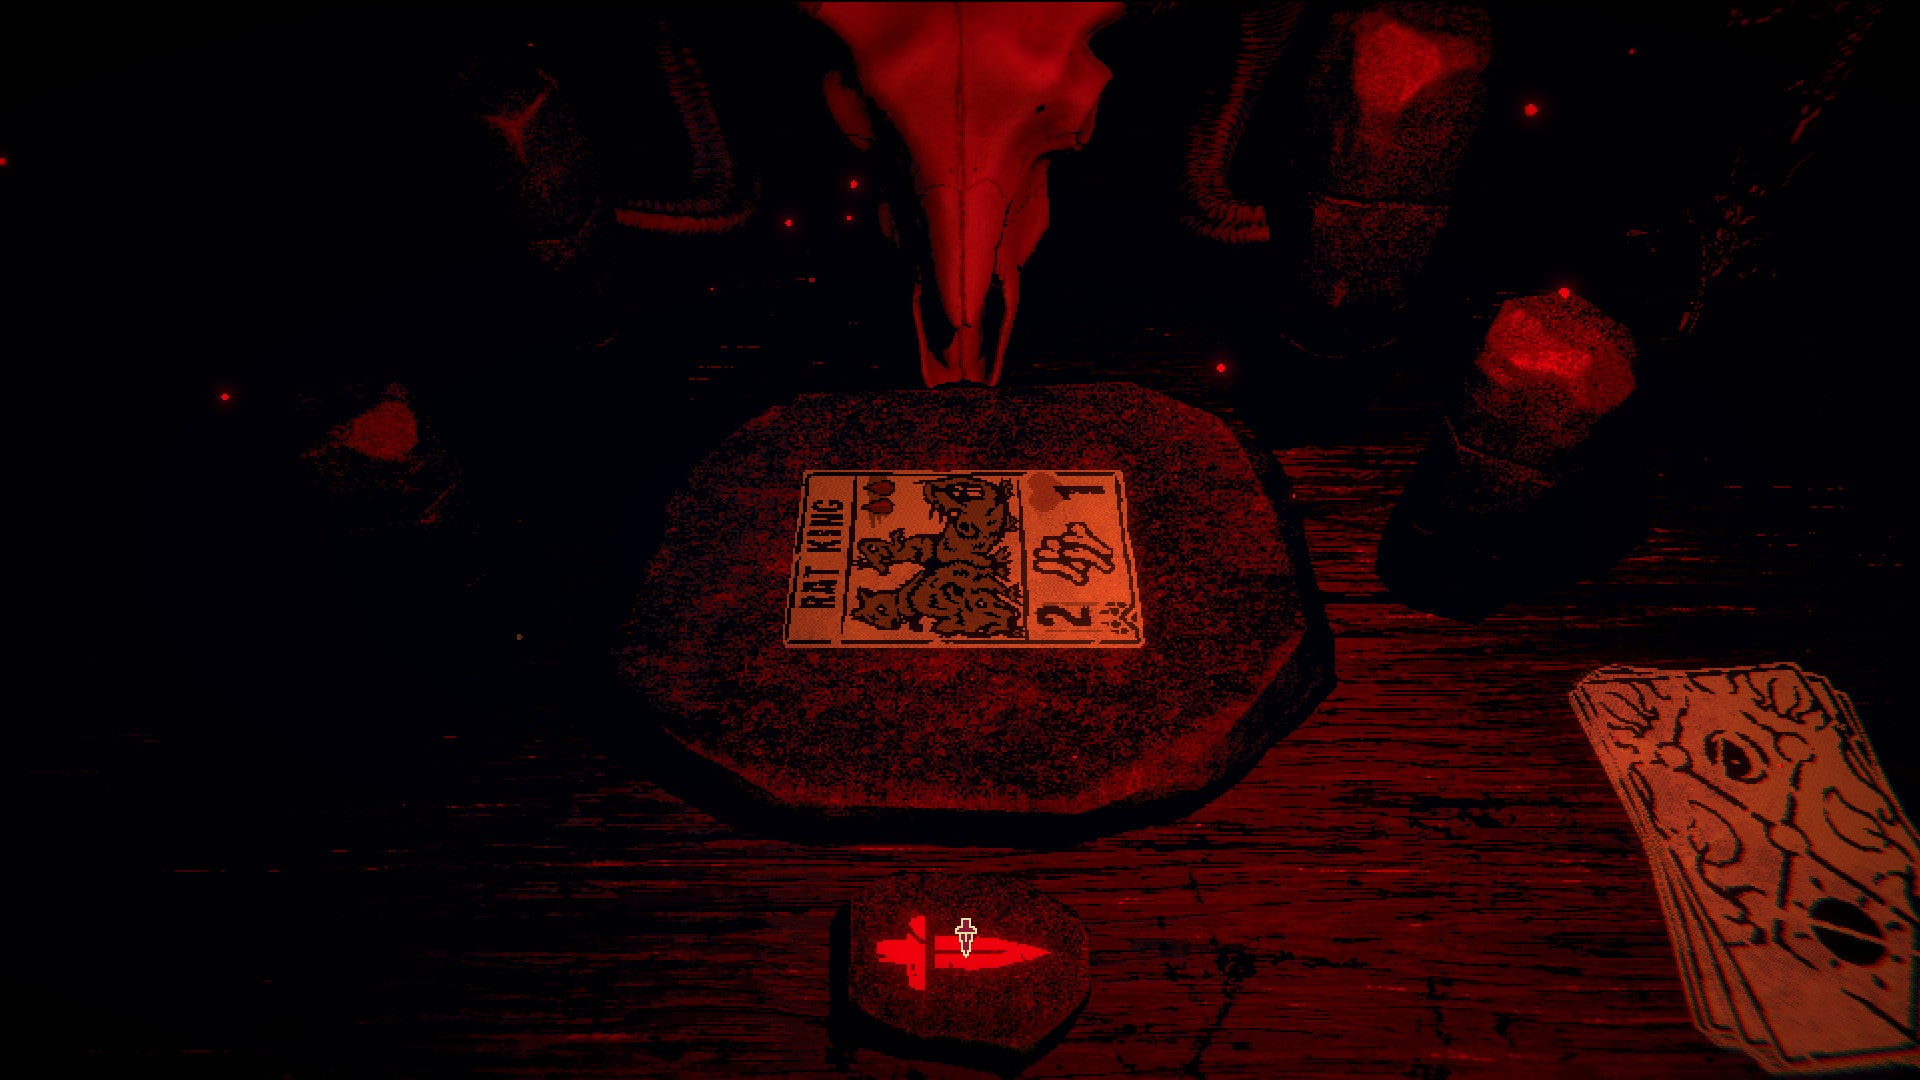 The player sacrificing the Rat King card in Inscryption